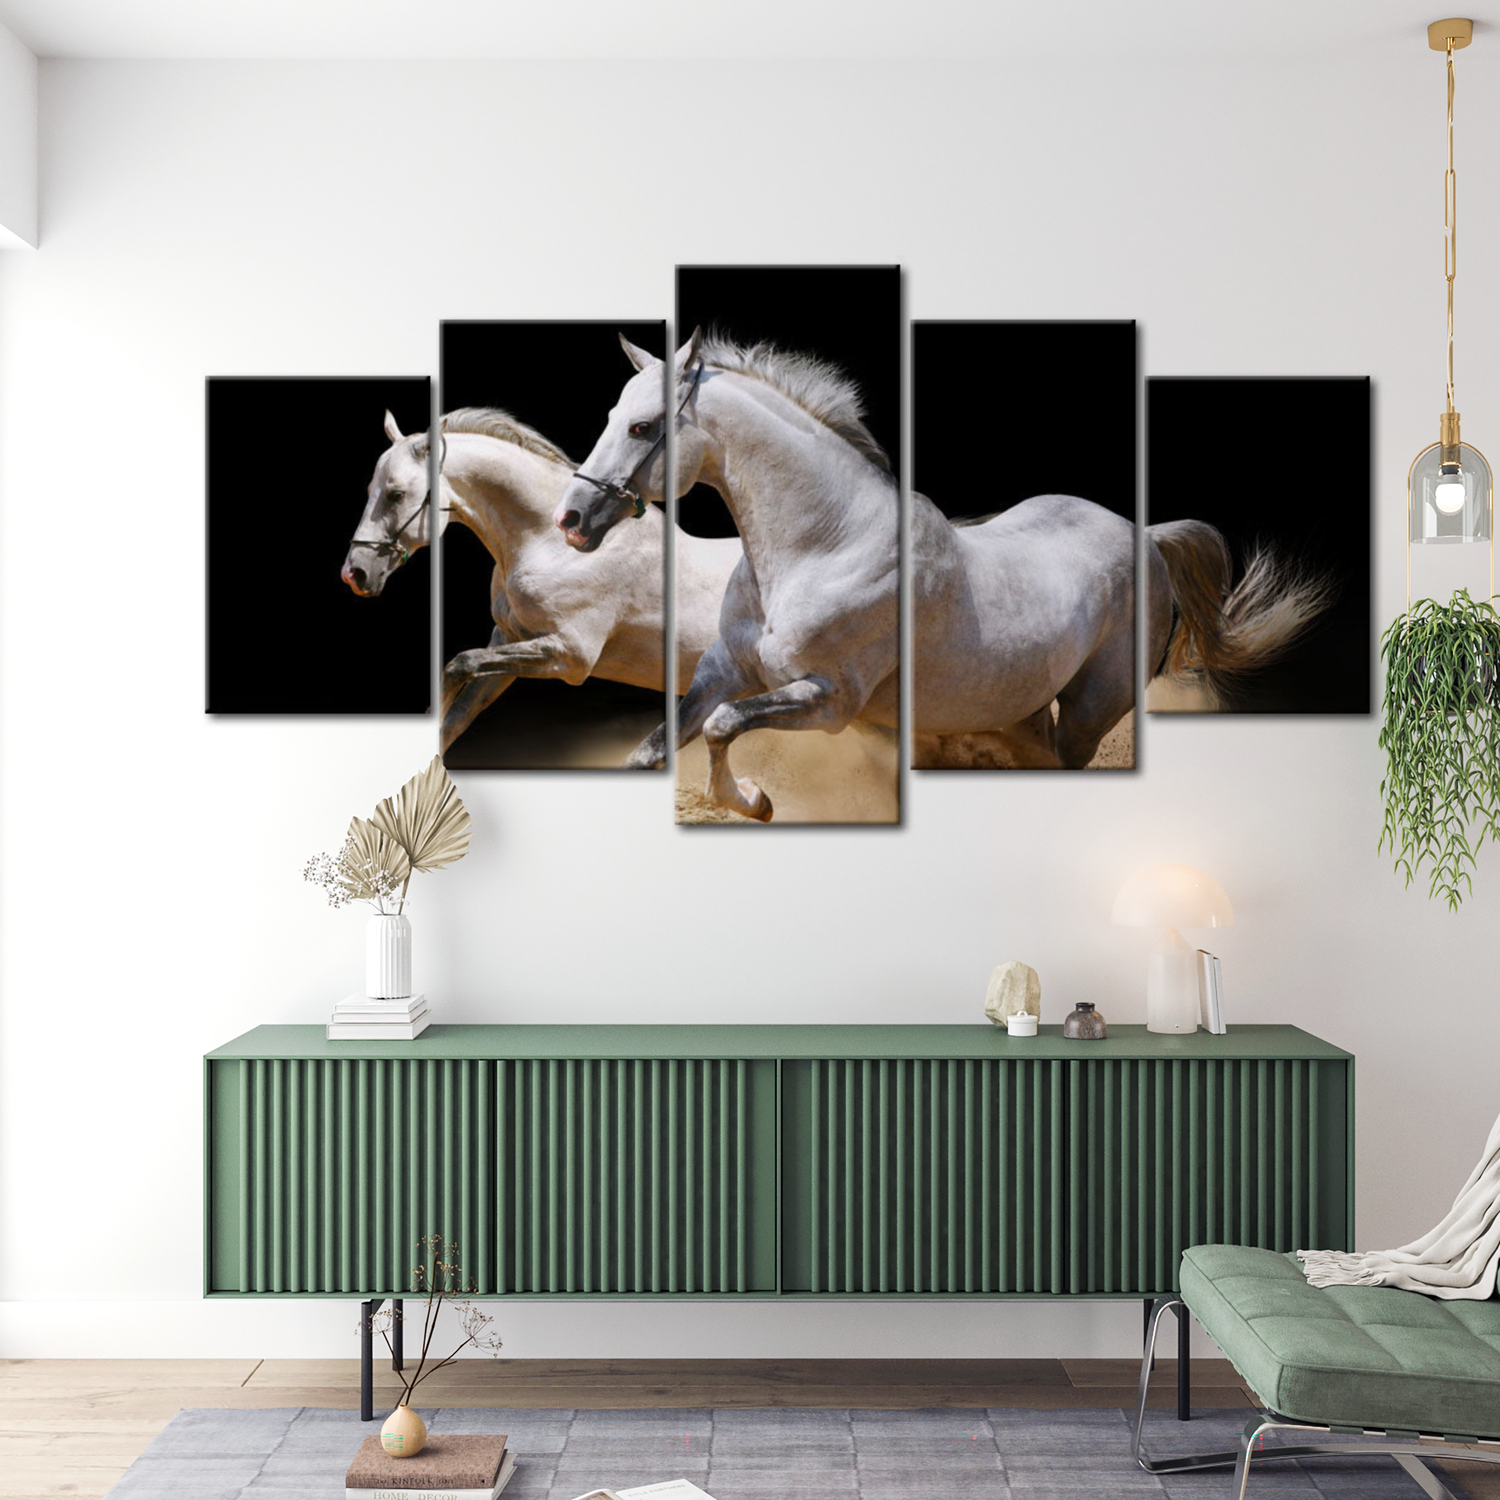 Stretched Canvas Animal Art - Running White Horses 40"Wx20"H